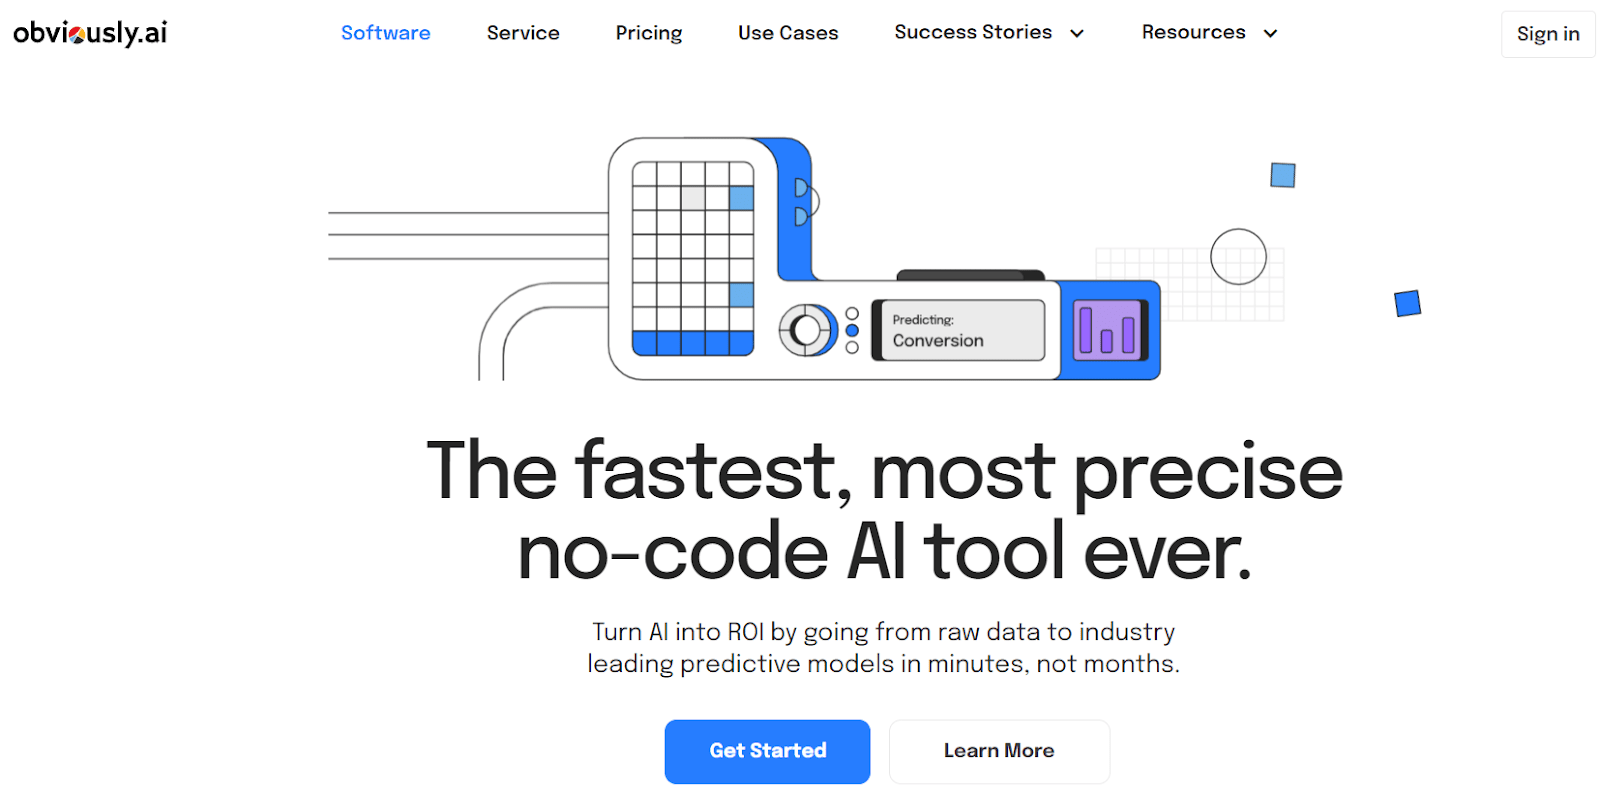 stack AI tool that you have test it out